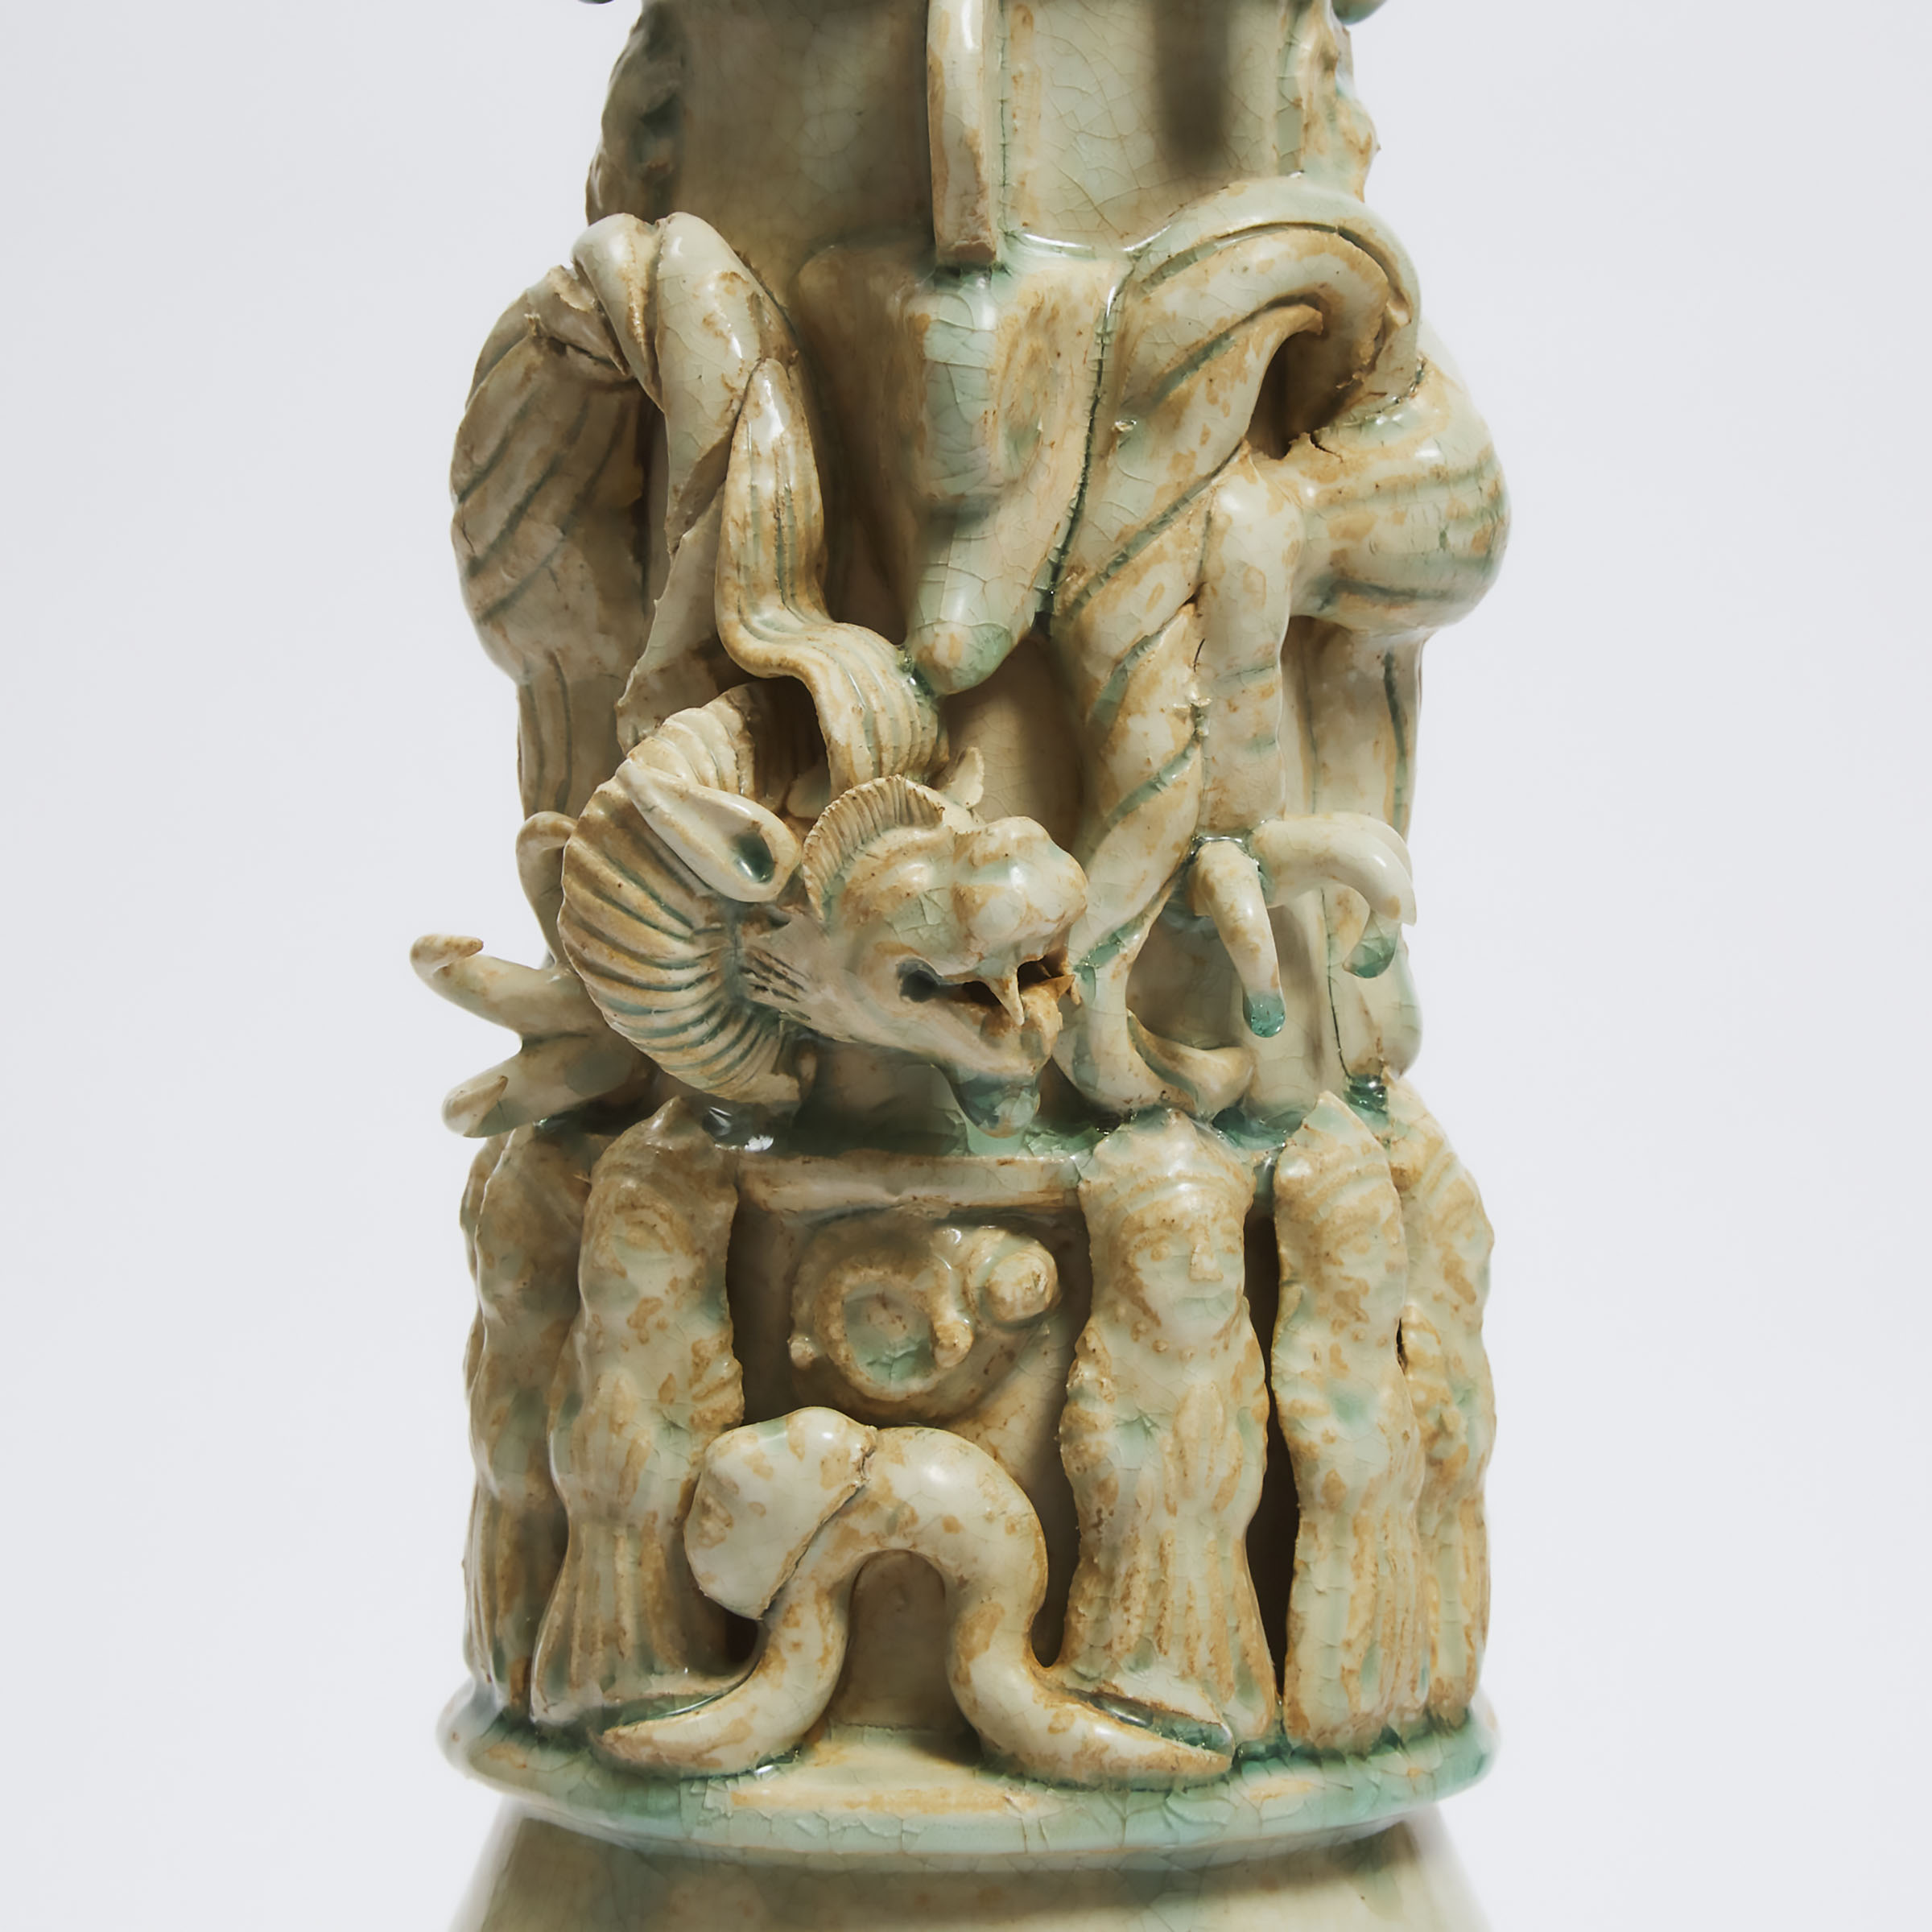 A Song-Style Qingbai Funerary Jar and Cover